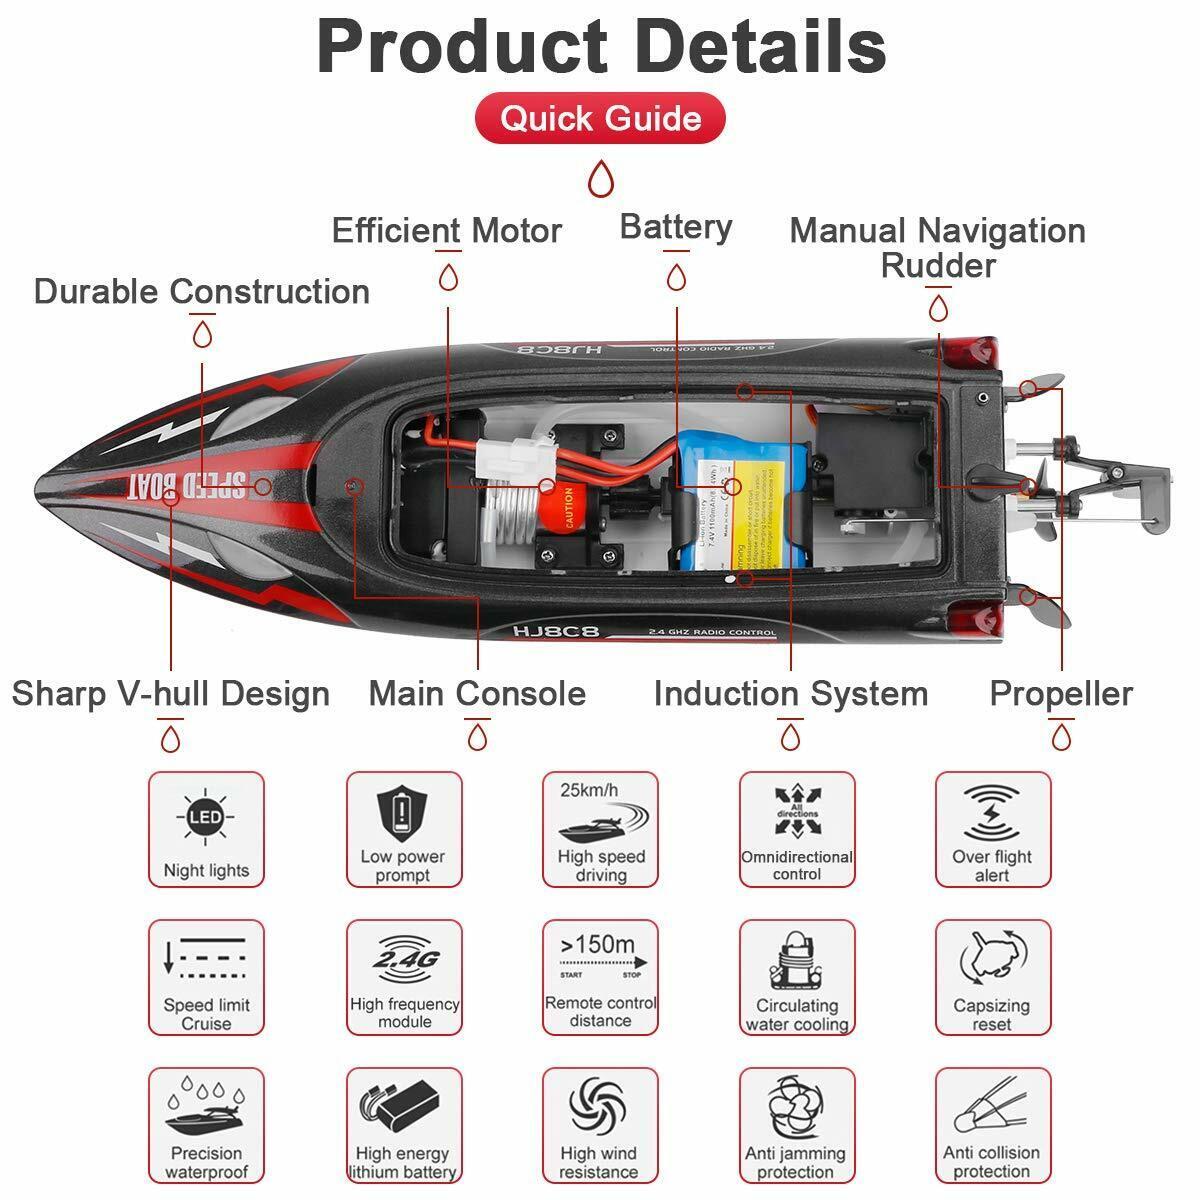 Hj808 Speedboat: Maintenance and Cost of the HJ808 Speedboat